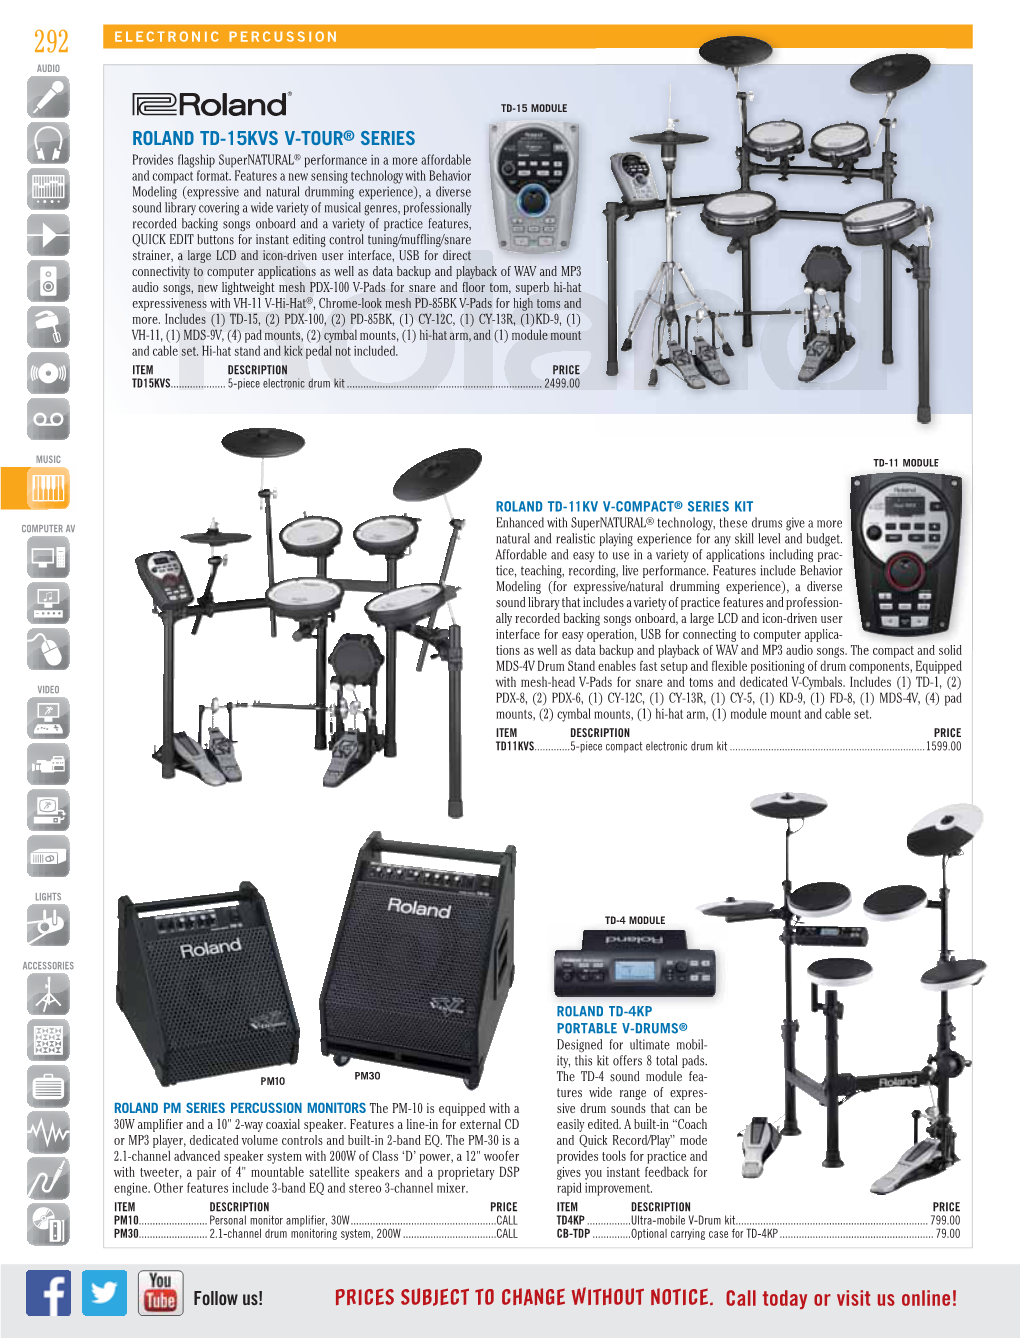 PRICES SUBJECT to CHANGE WITHOUT NOTICE. Call Today Or Visit Us Online! ELECTRONIC PERCUSSION 293